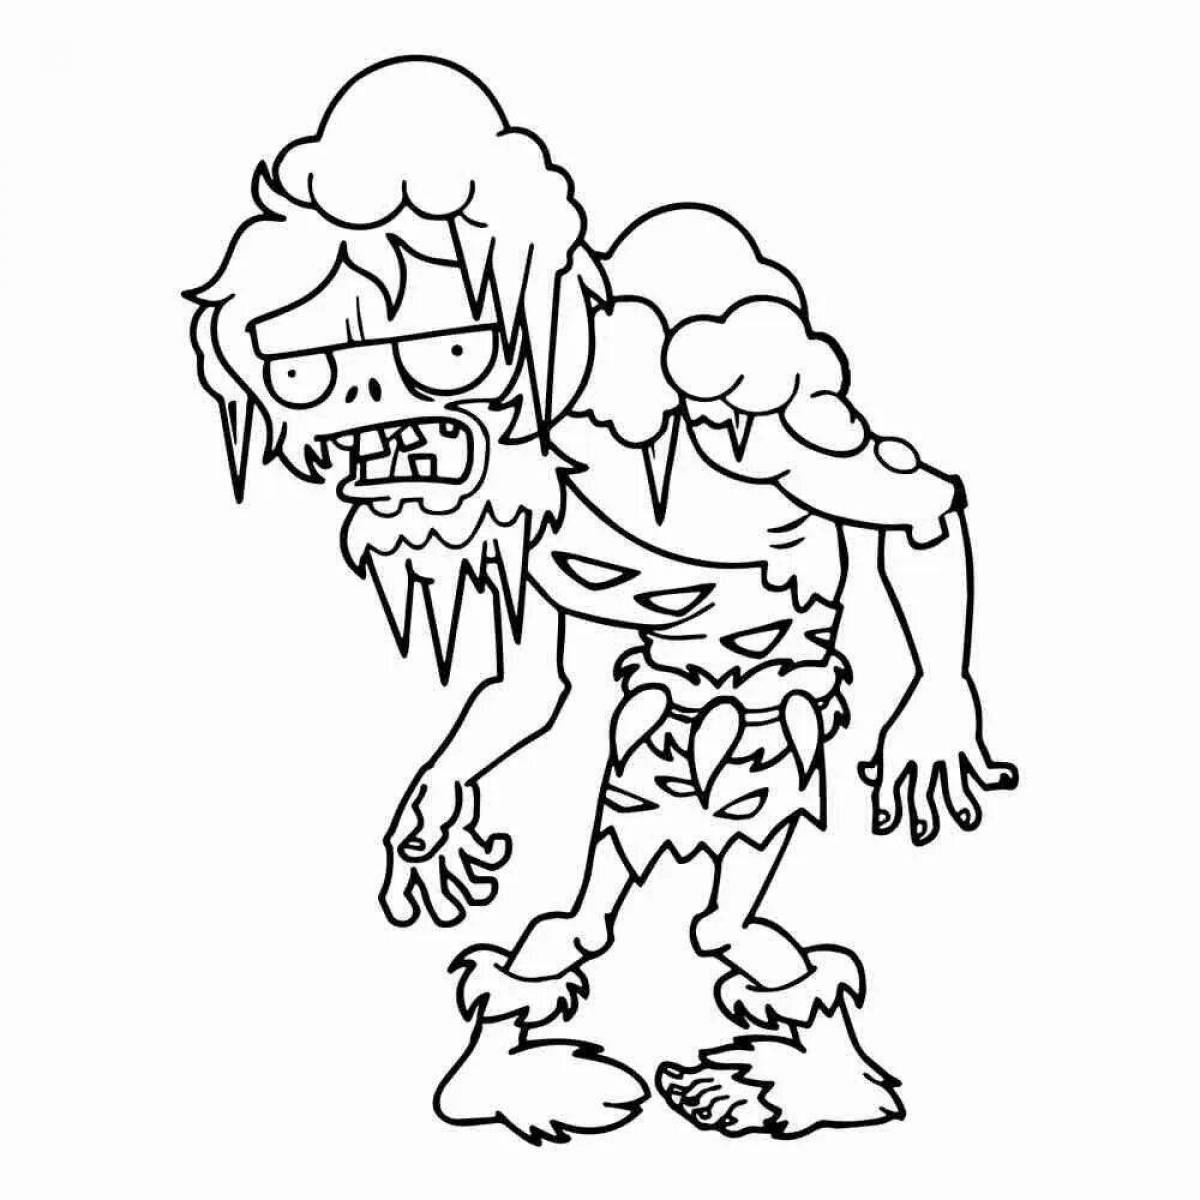 Coloring book terrifying zombie dykes